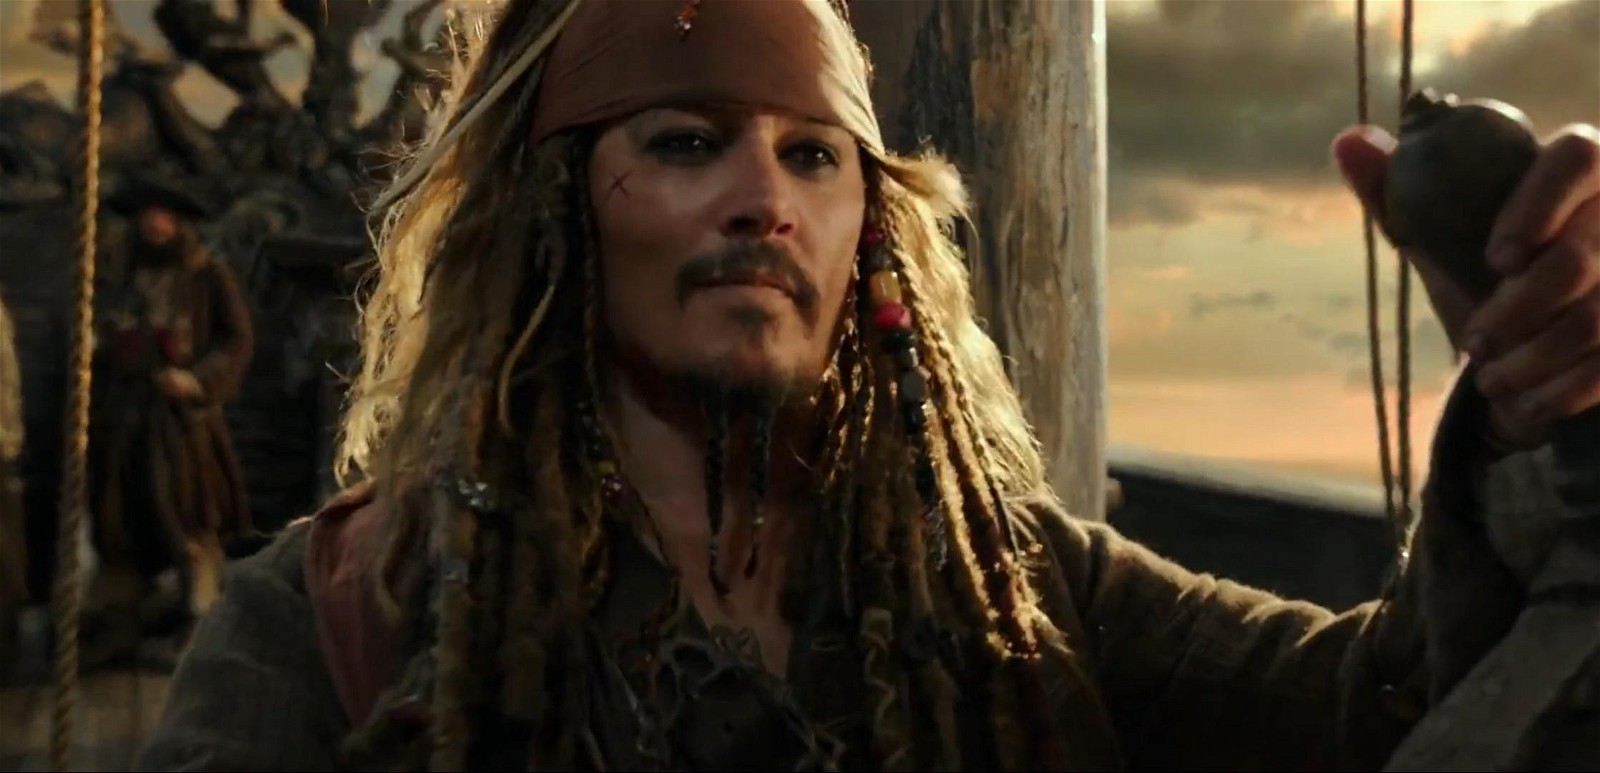 Johnny Depp as Jack Sparrow of "Pirates of The Caribbean".